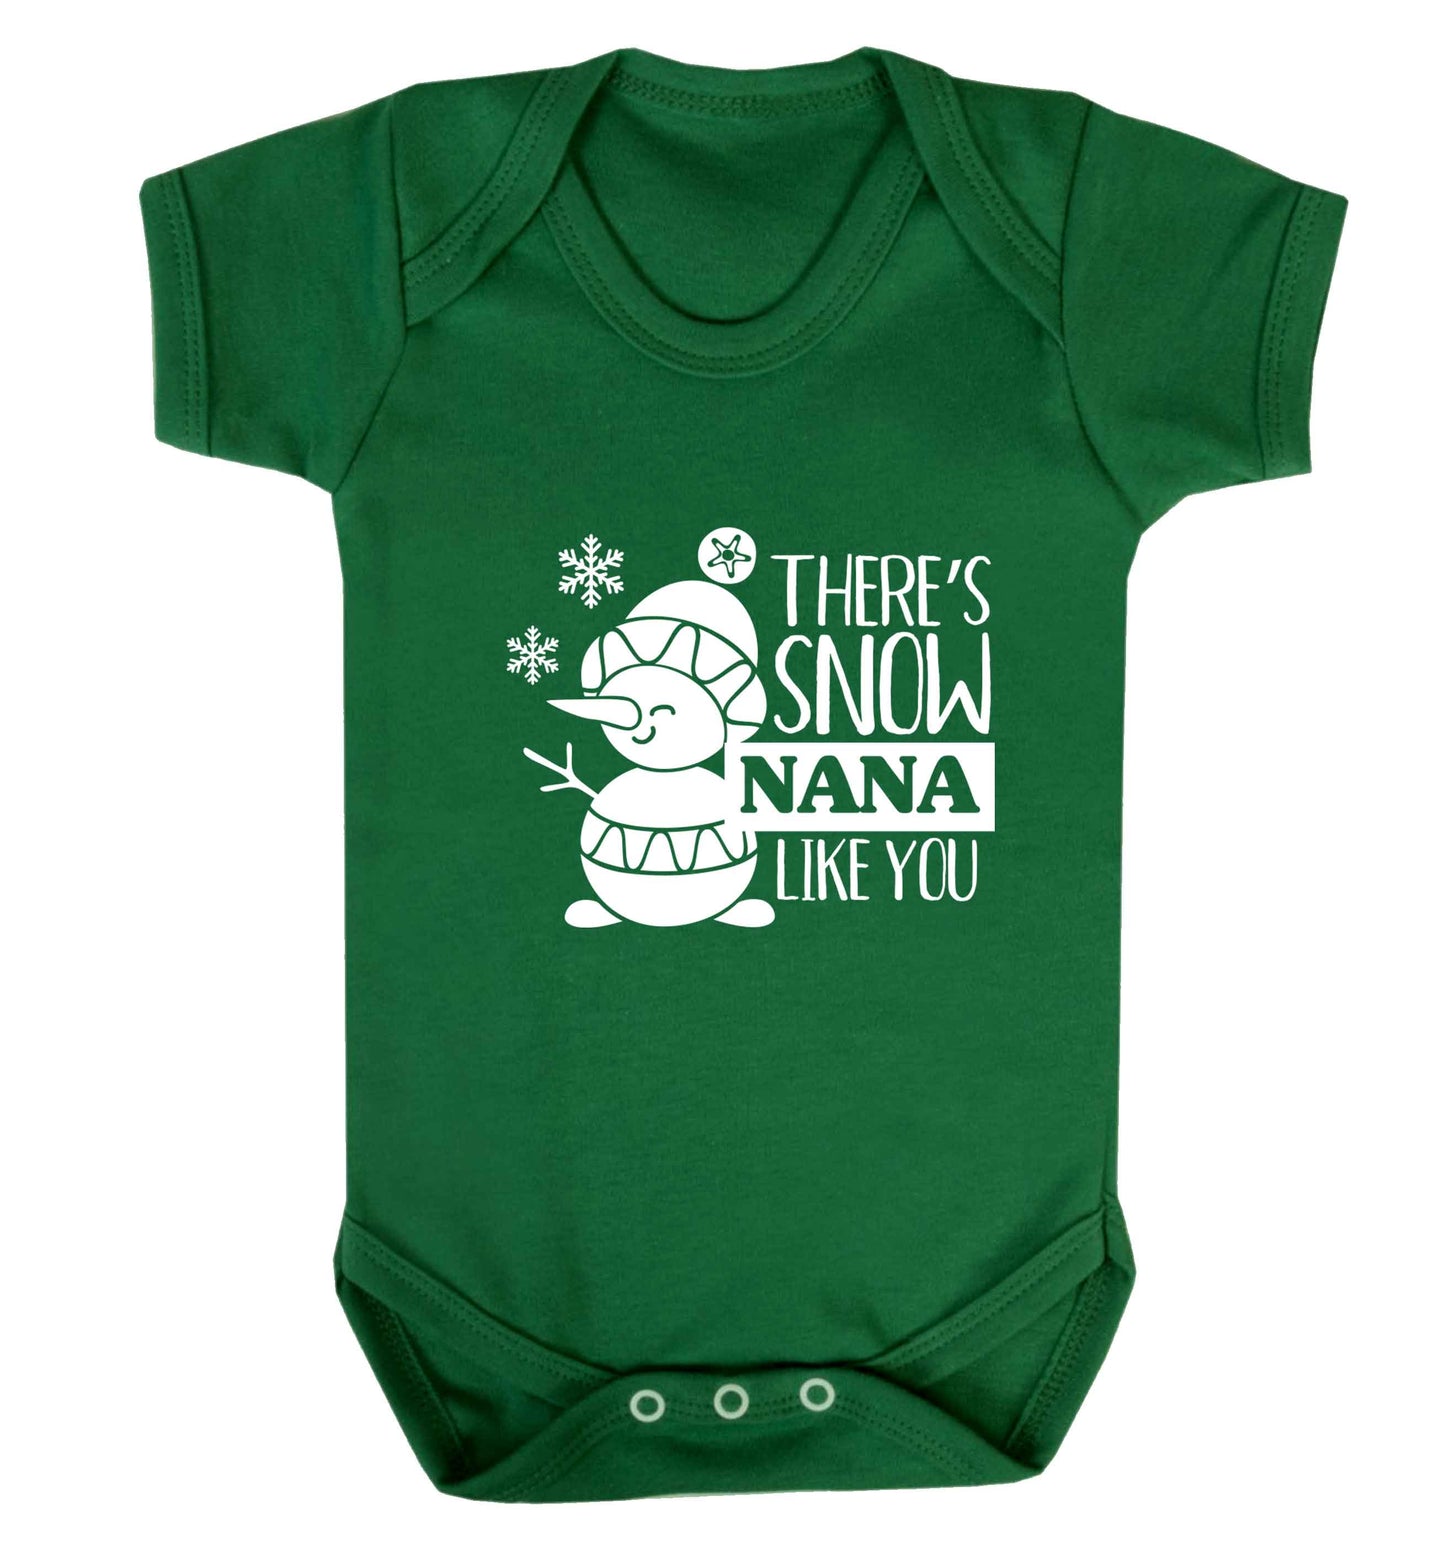 There's snow nana like you baby vest green 18-24 months